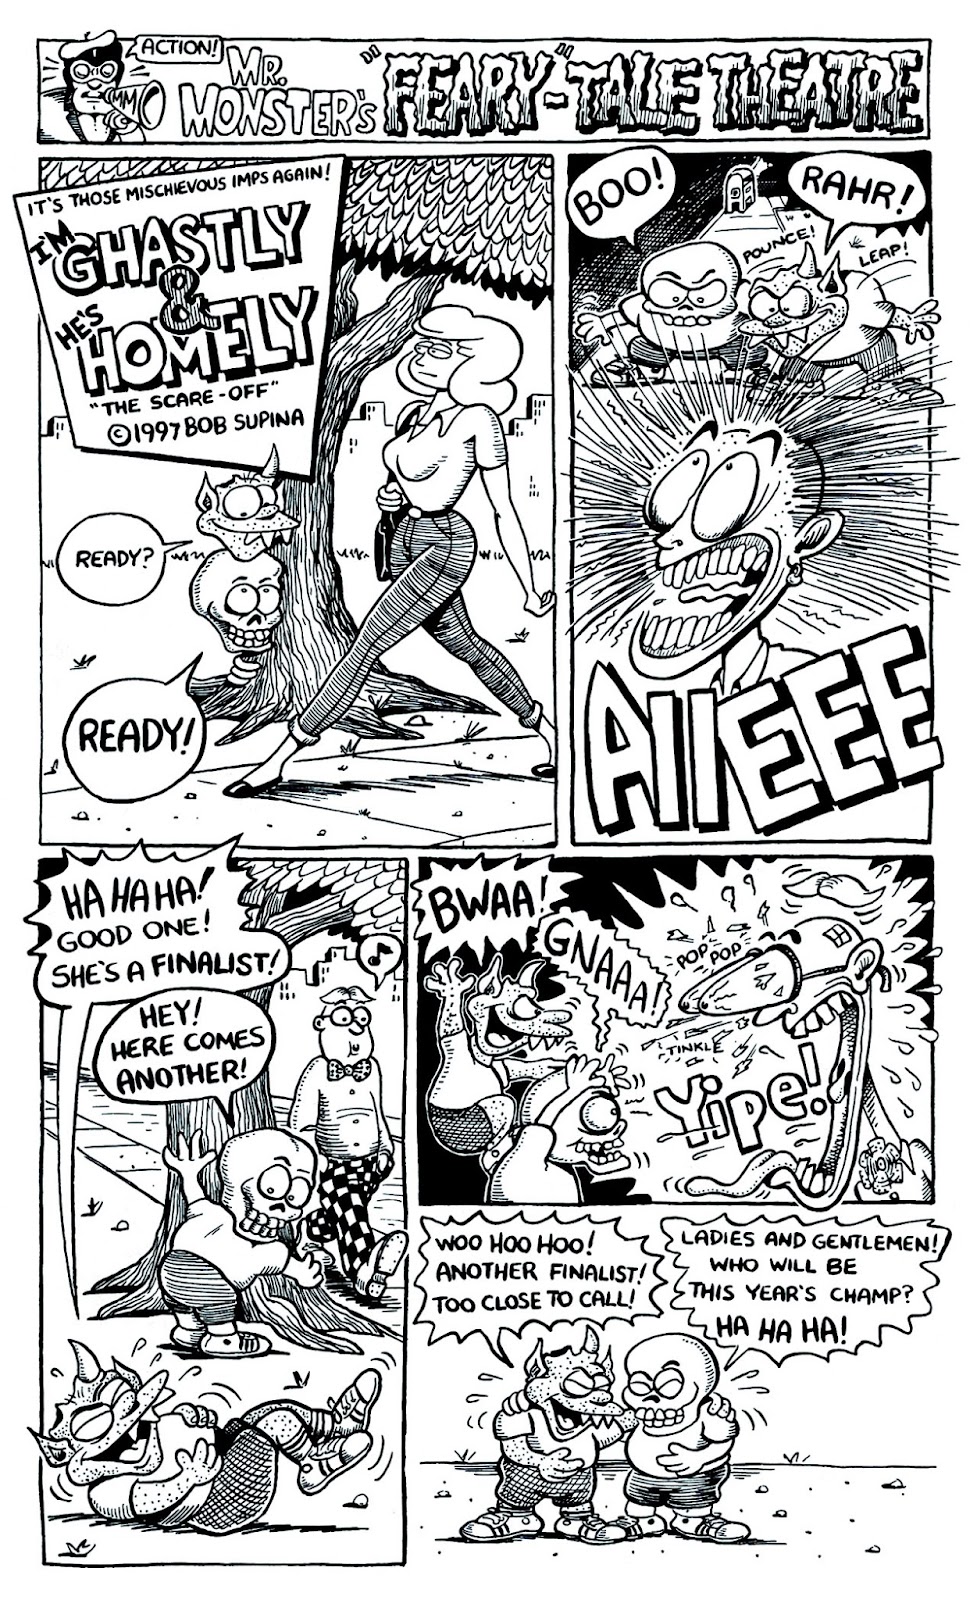 Mr. Monster Presents: (crack-a-boom) issue 3 - Page 19